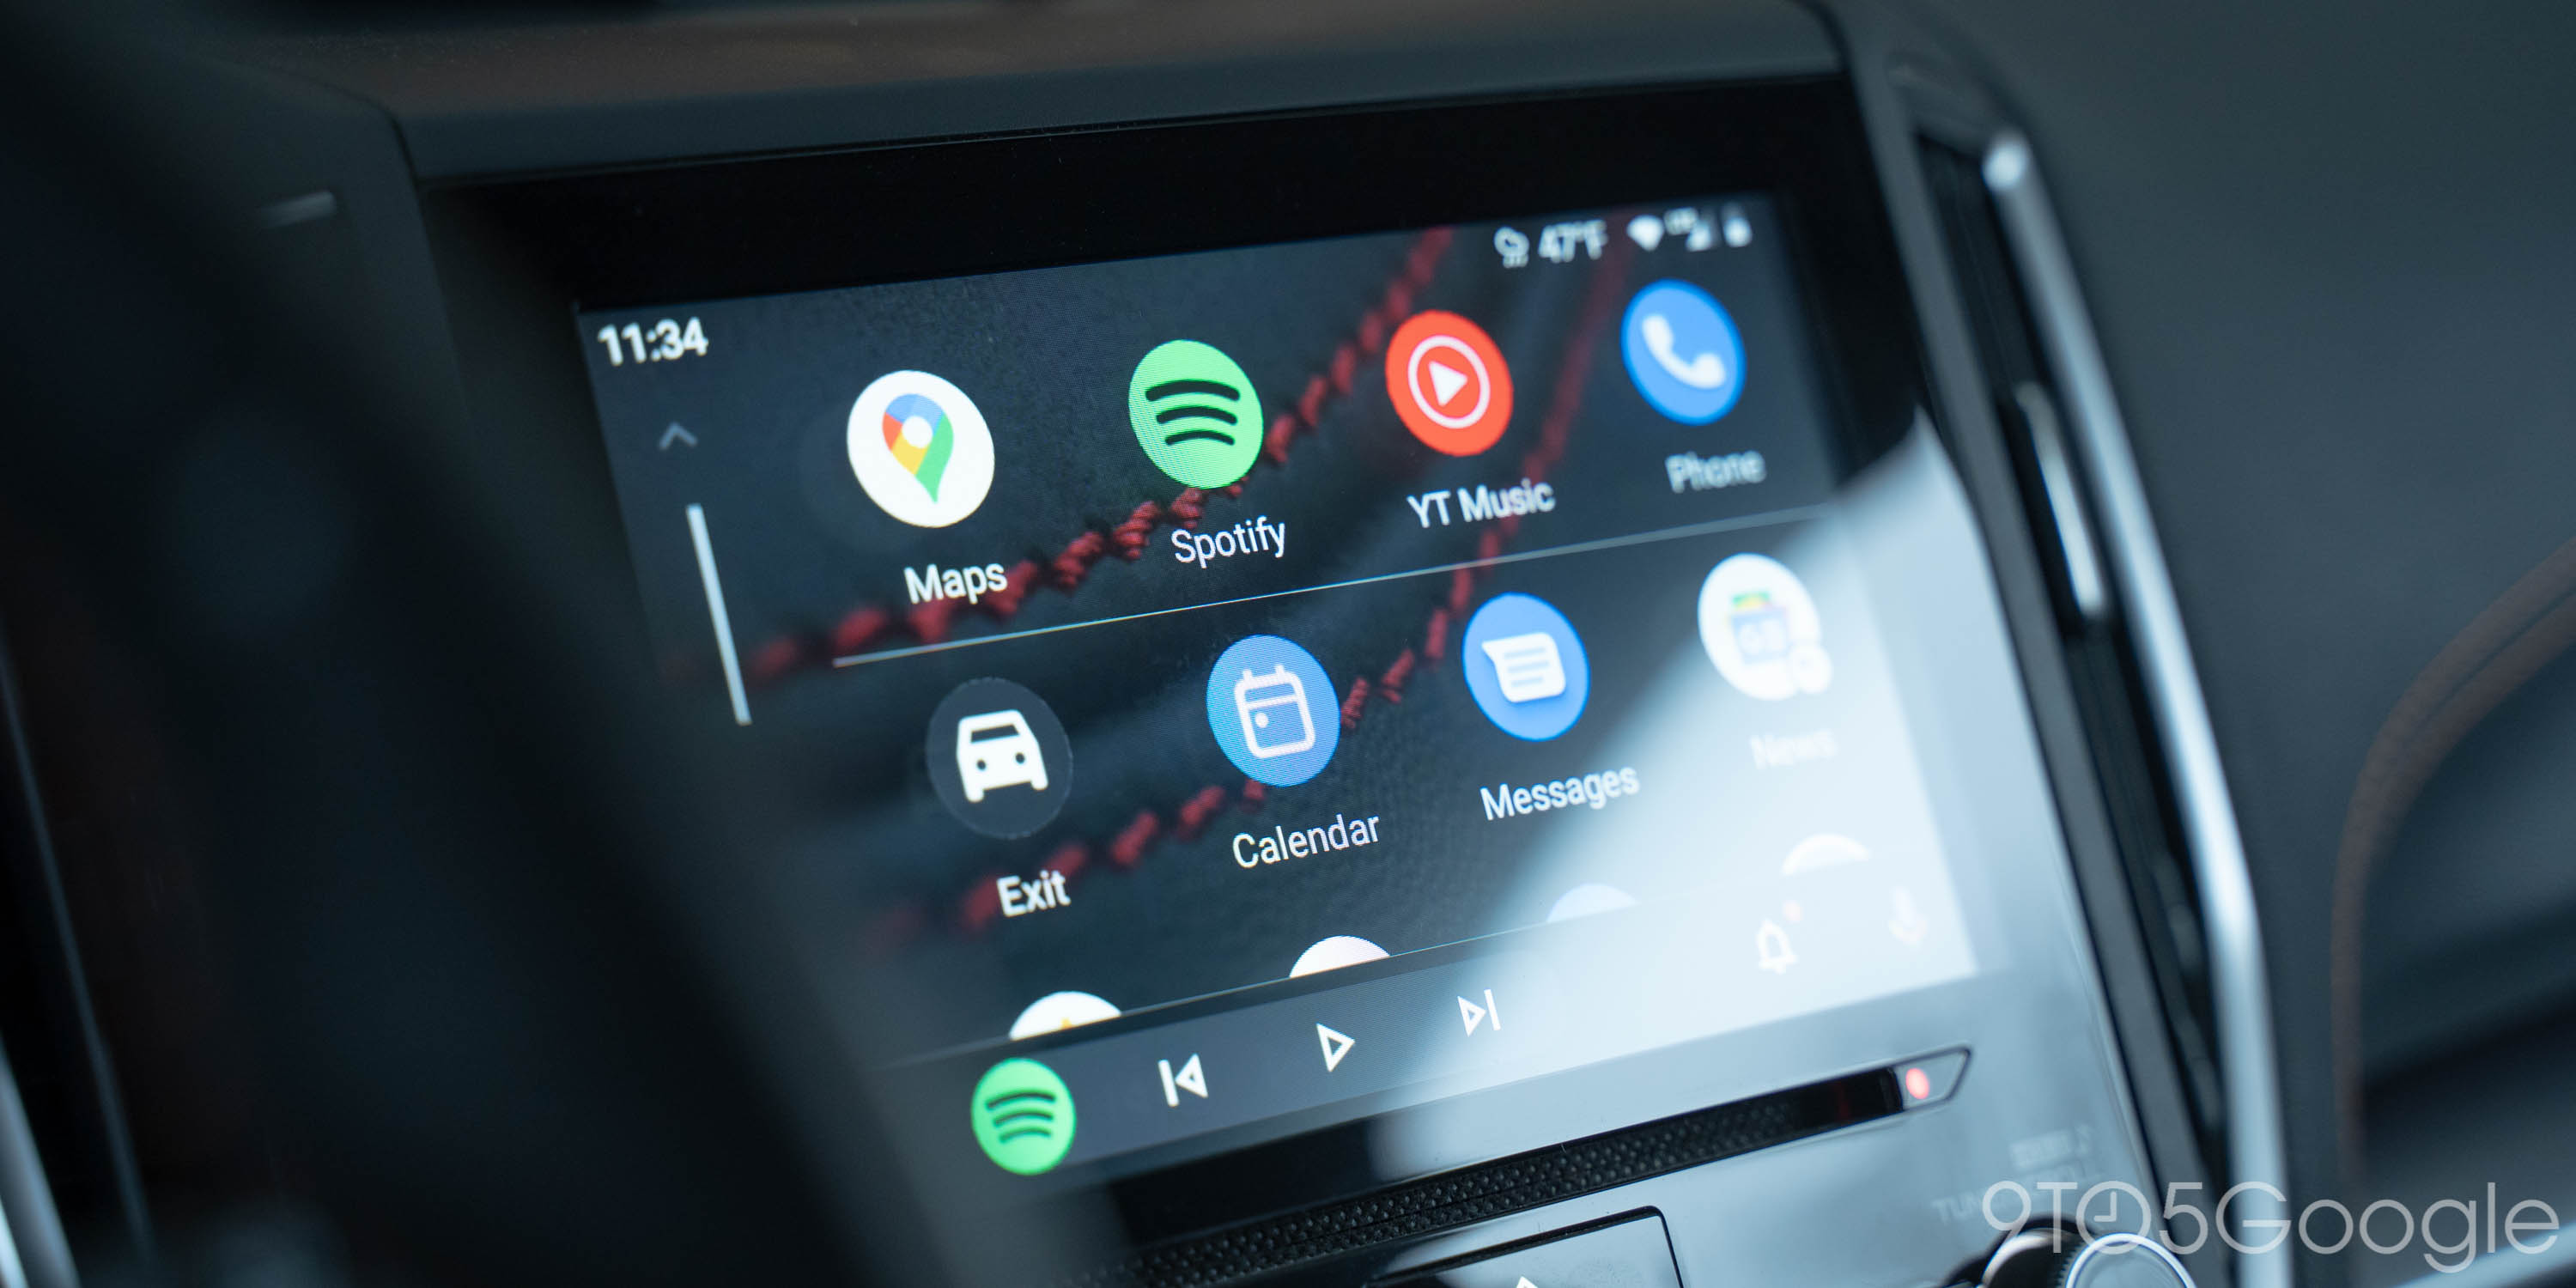 Screens and apps on Android Auto - Android Auto Help